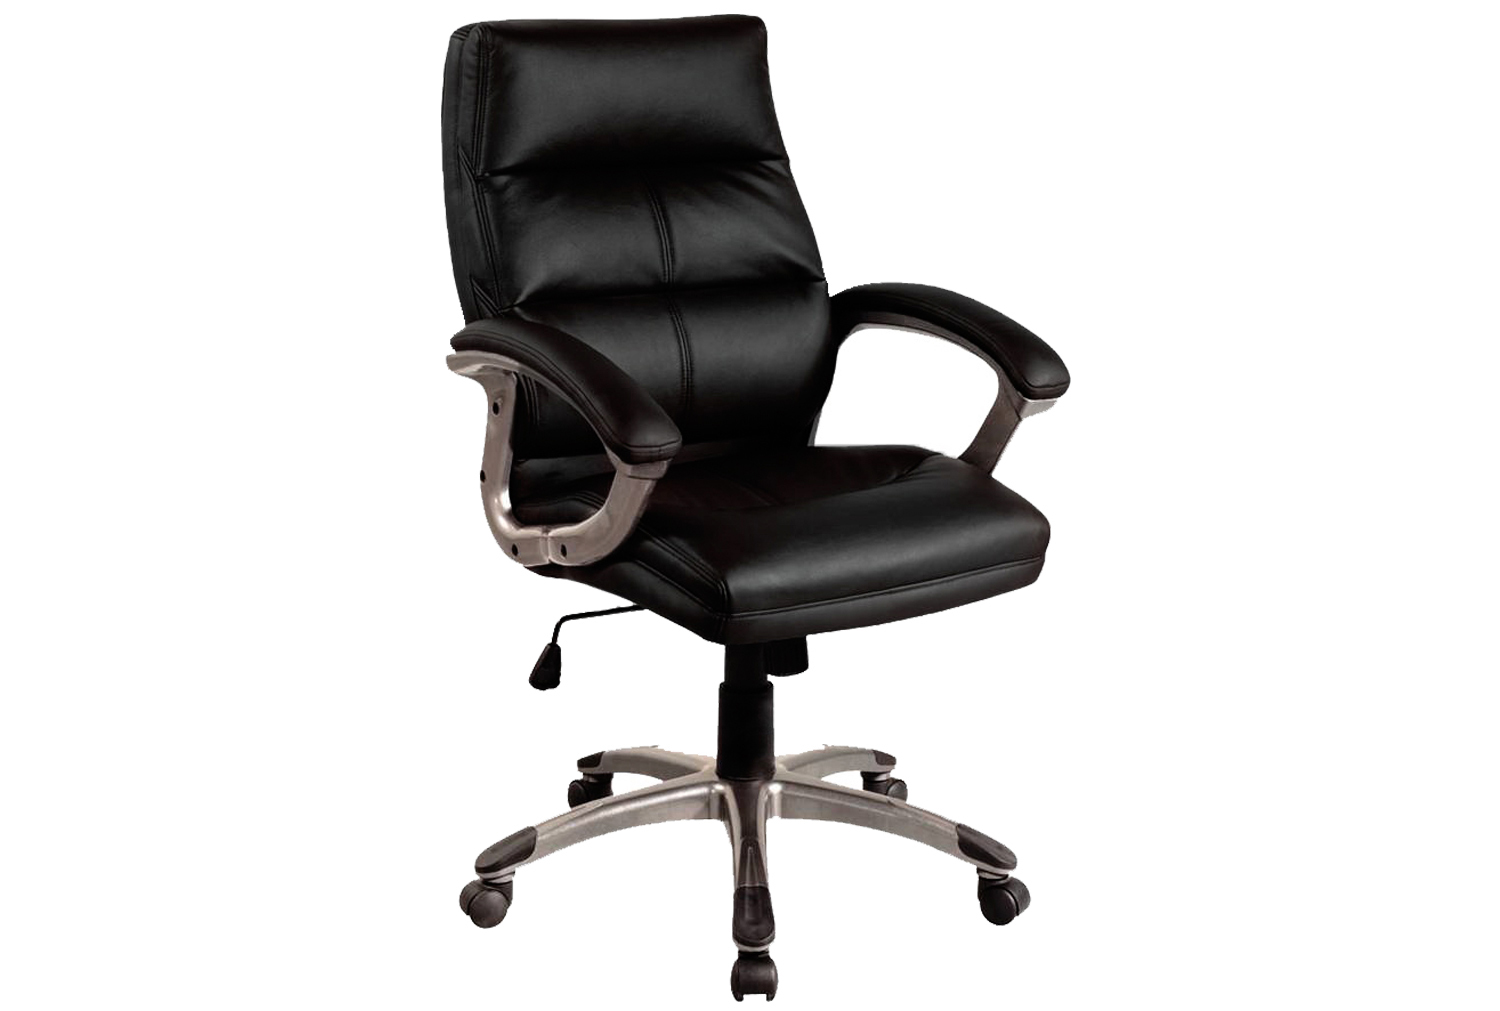 Telford Black Executive Office Chair, Express Delivery